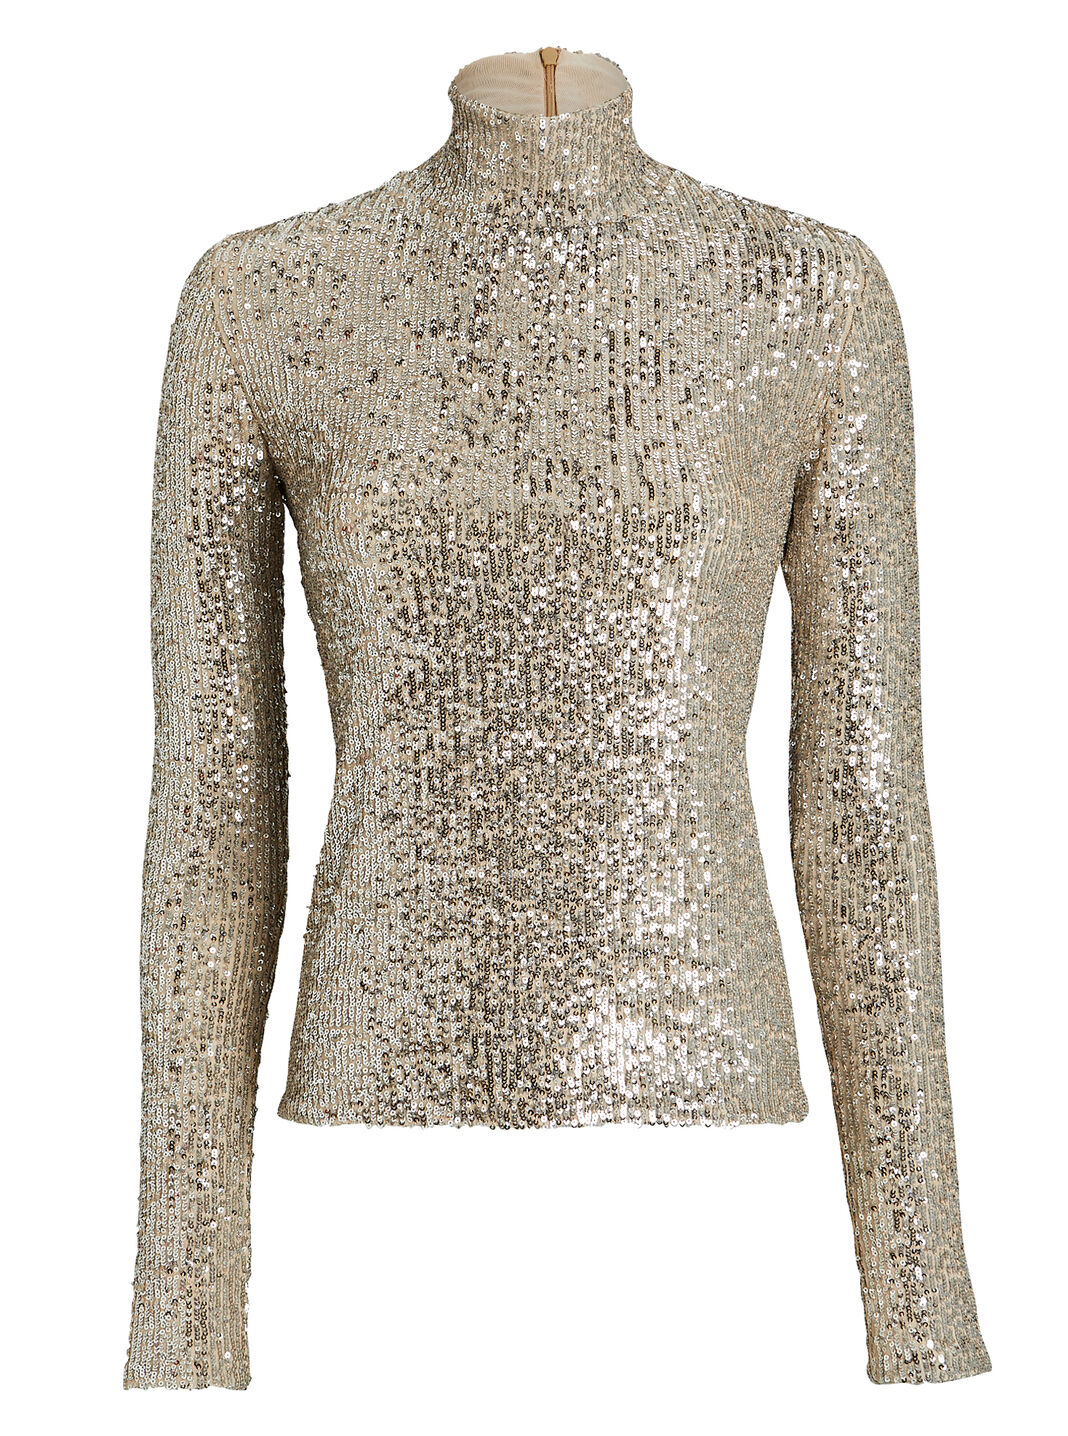 Tivia Sequined Knit Turtleneck Top